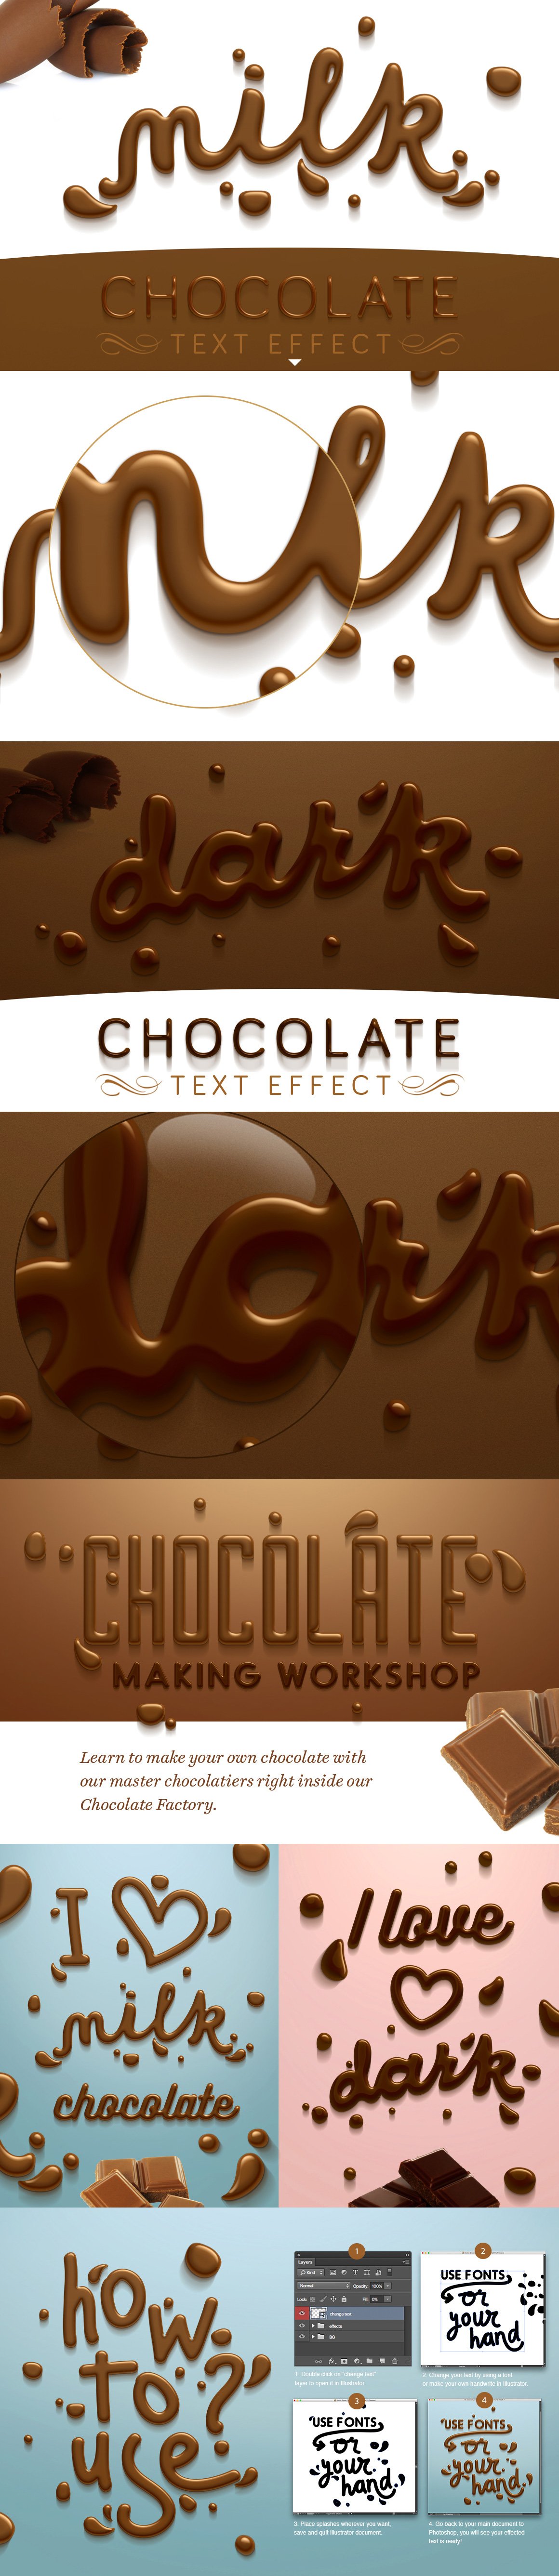 Chocolate Text Effectcover image.